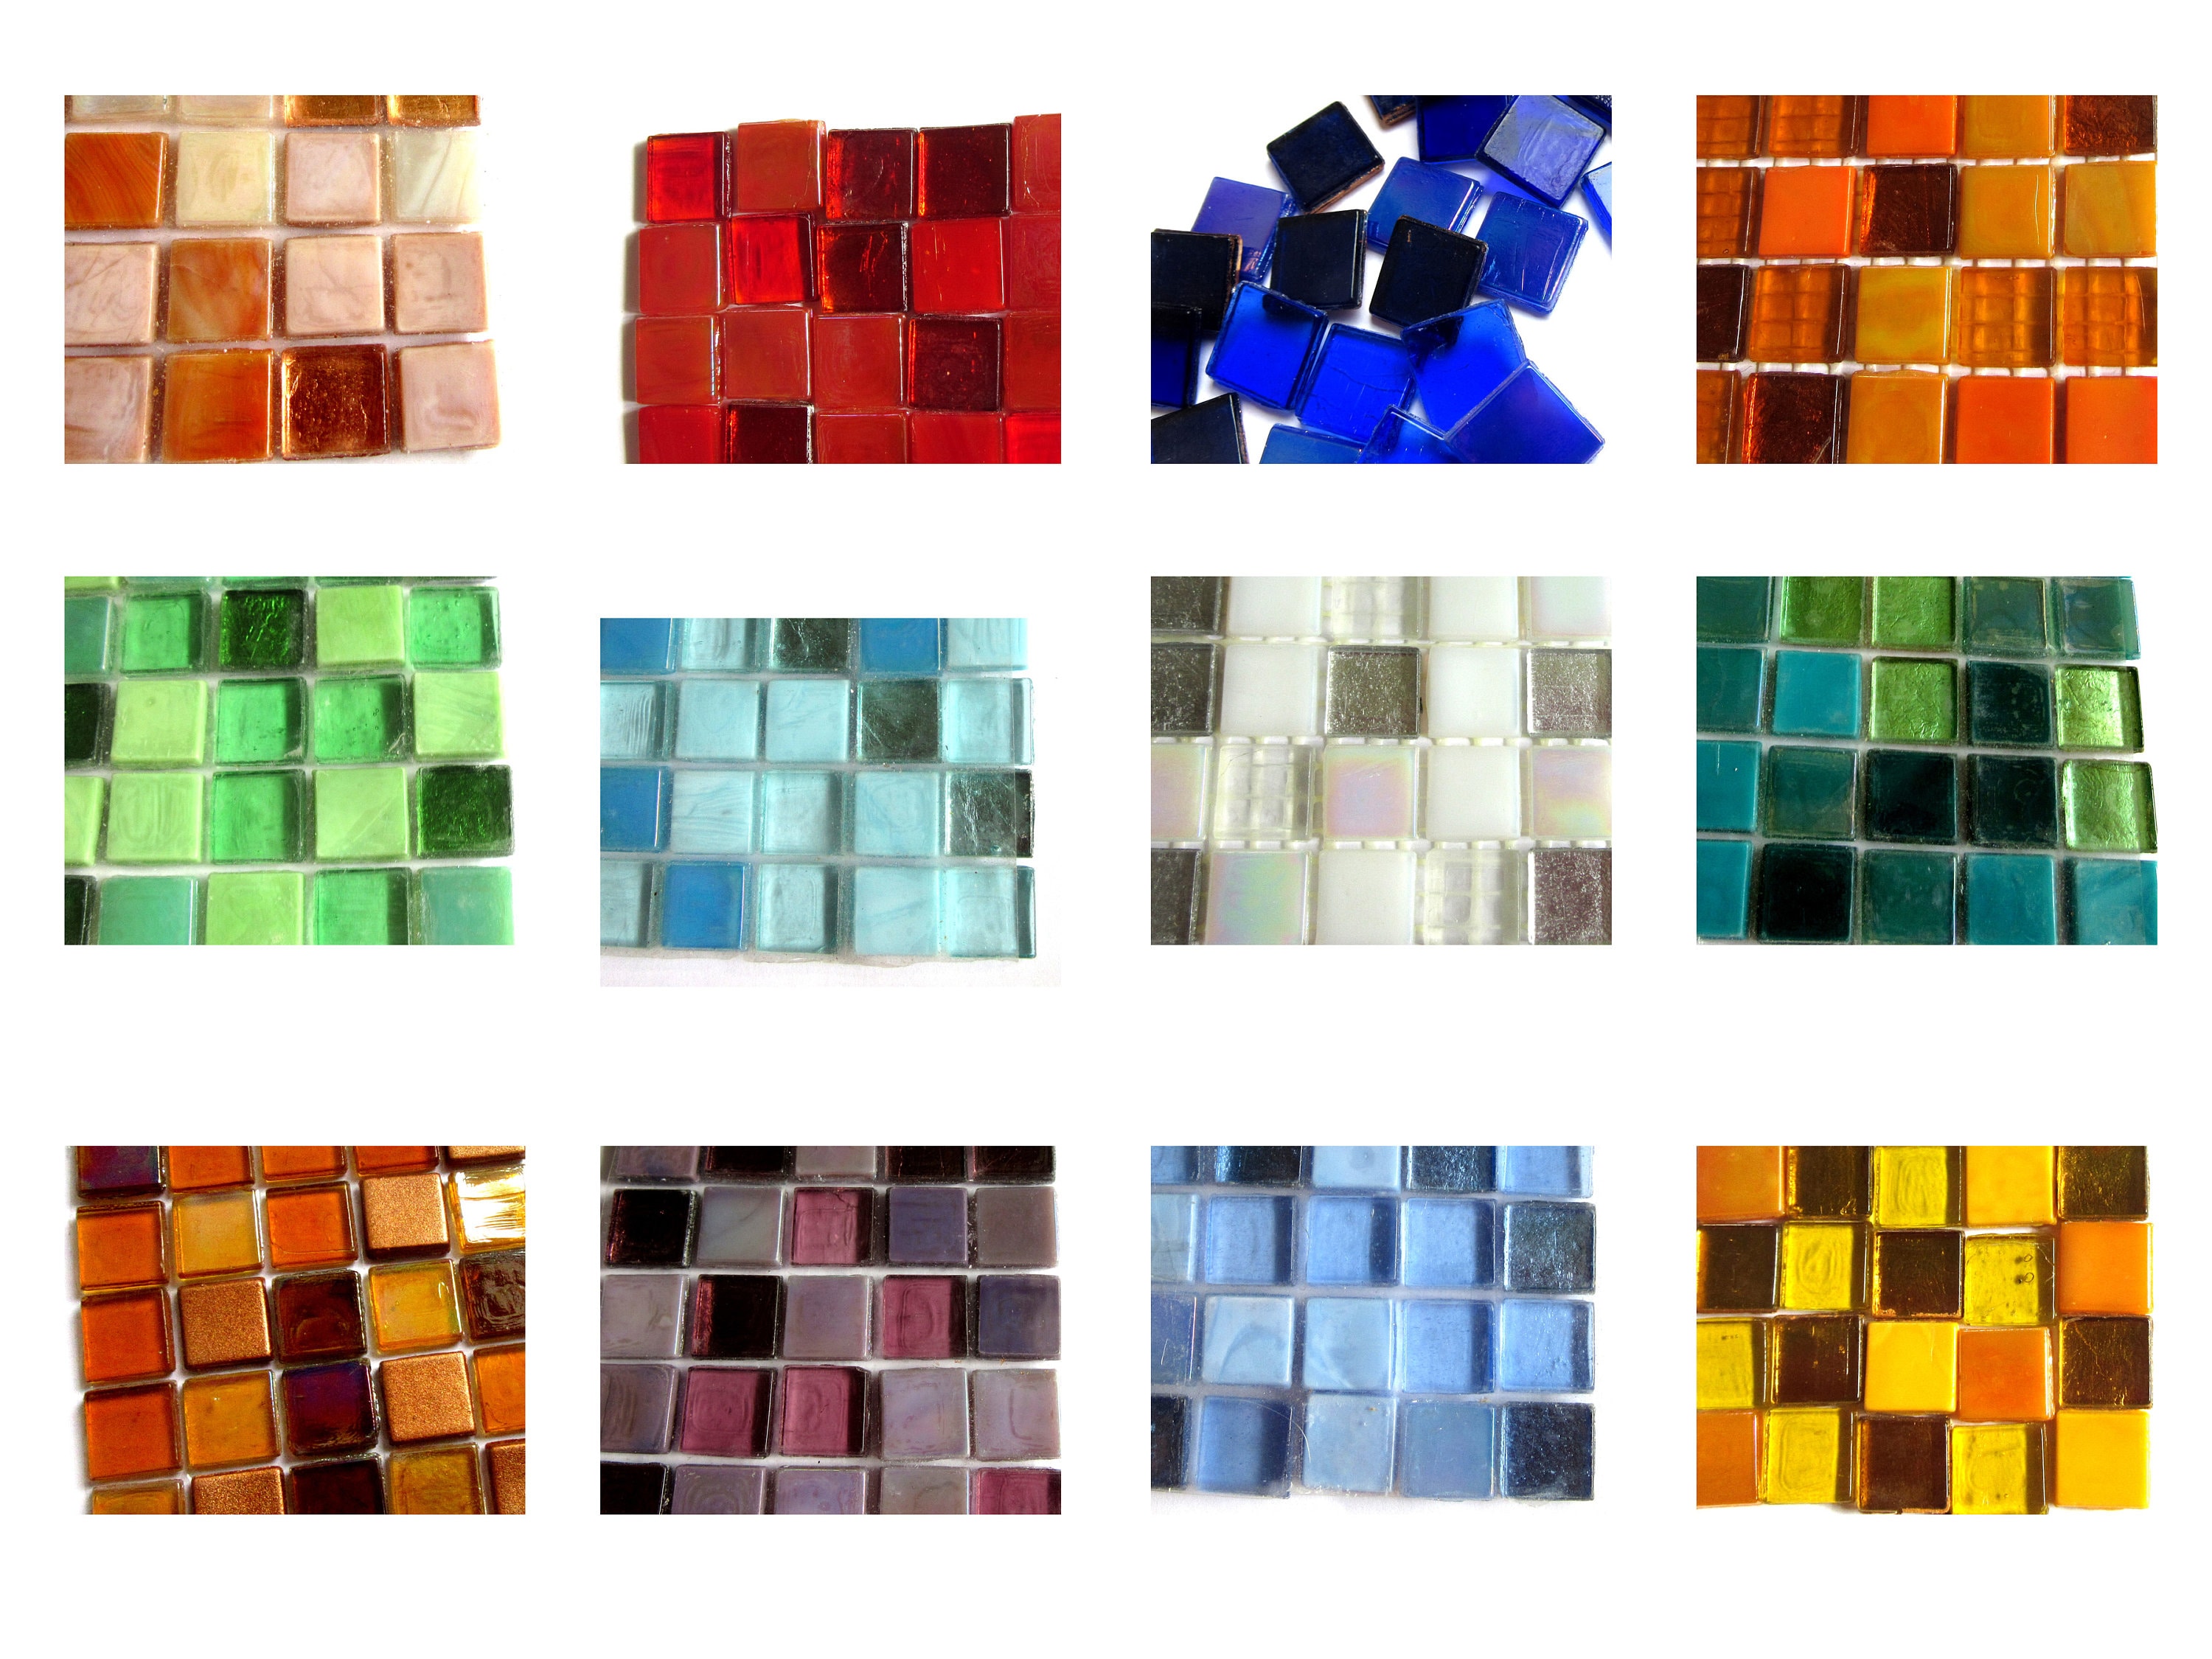 Wholesale Square Triangle Mosaic Tiles Tessera Glass Pieces for Mosaic  Making